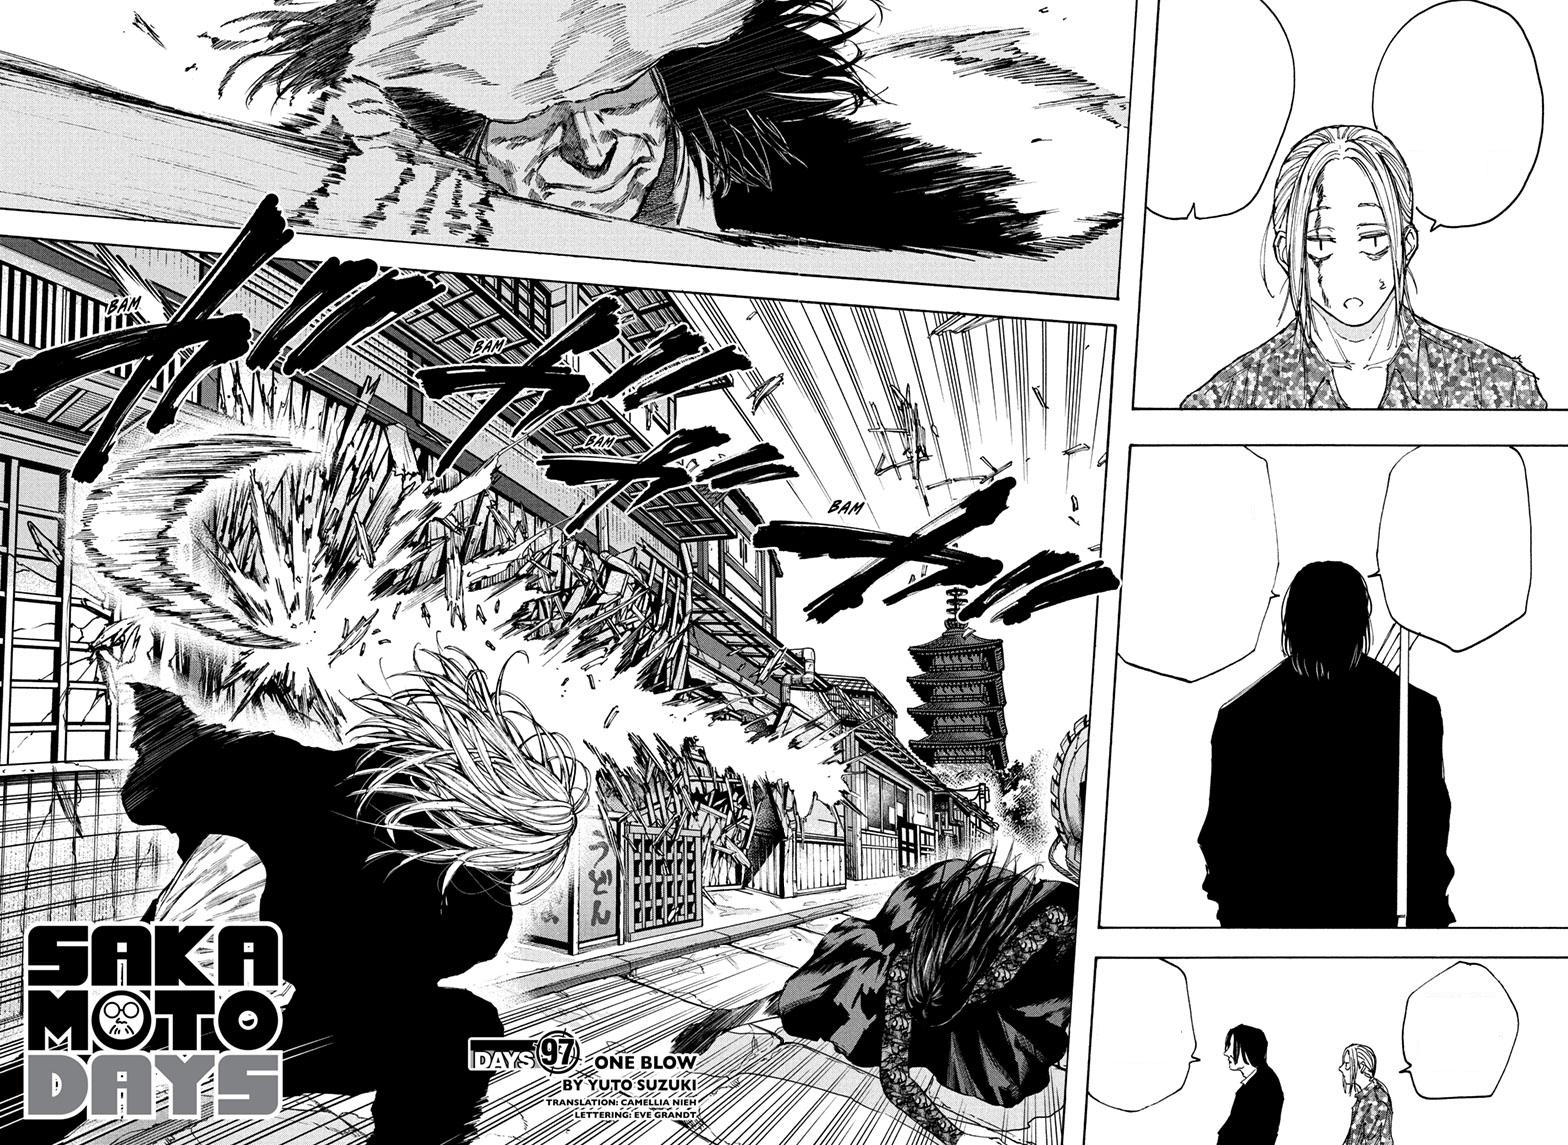 Sakamoto Days Chapter 120 Discussion - Forums 